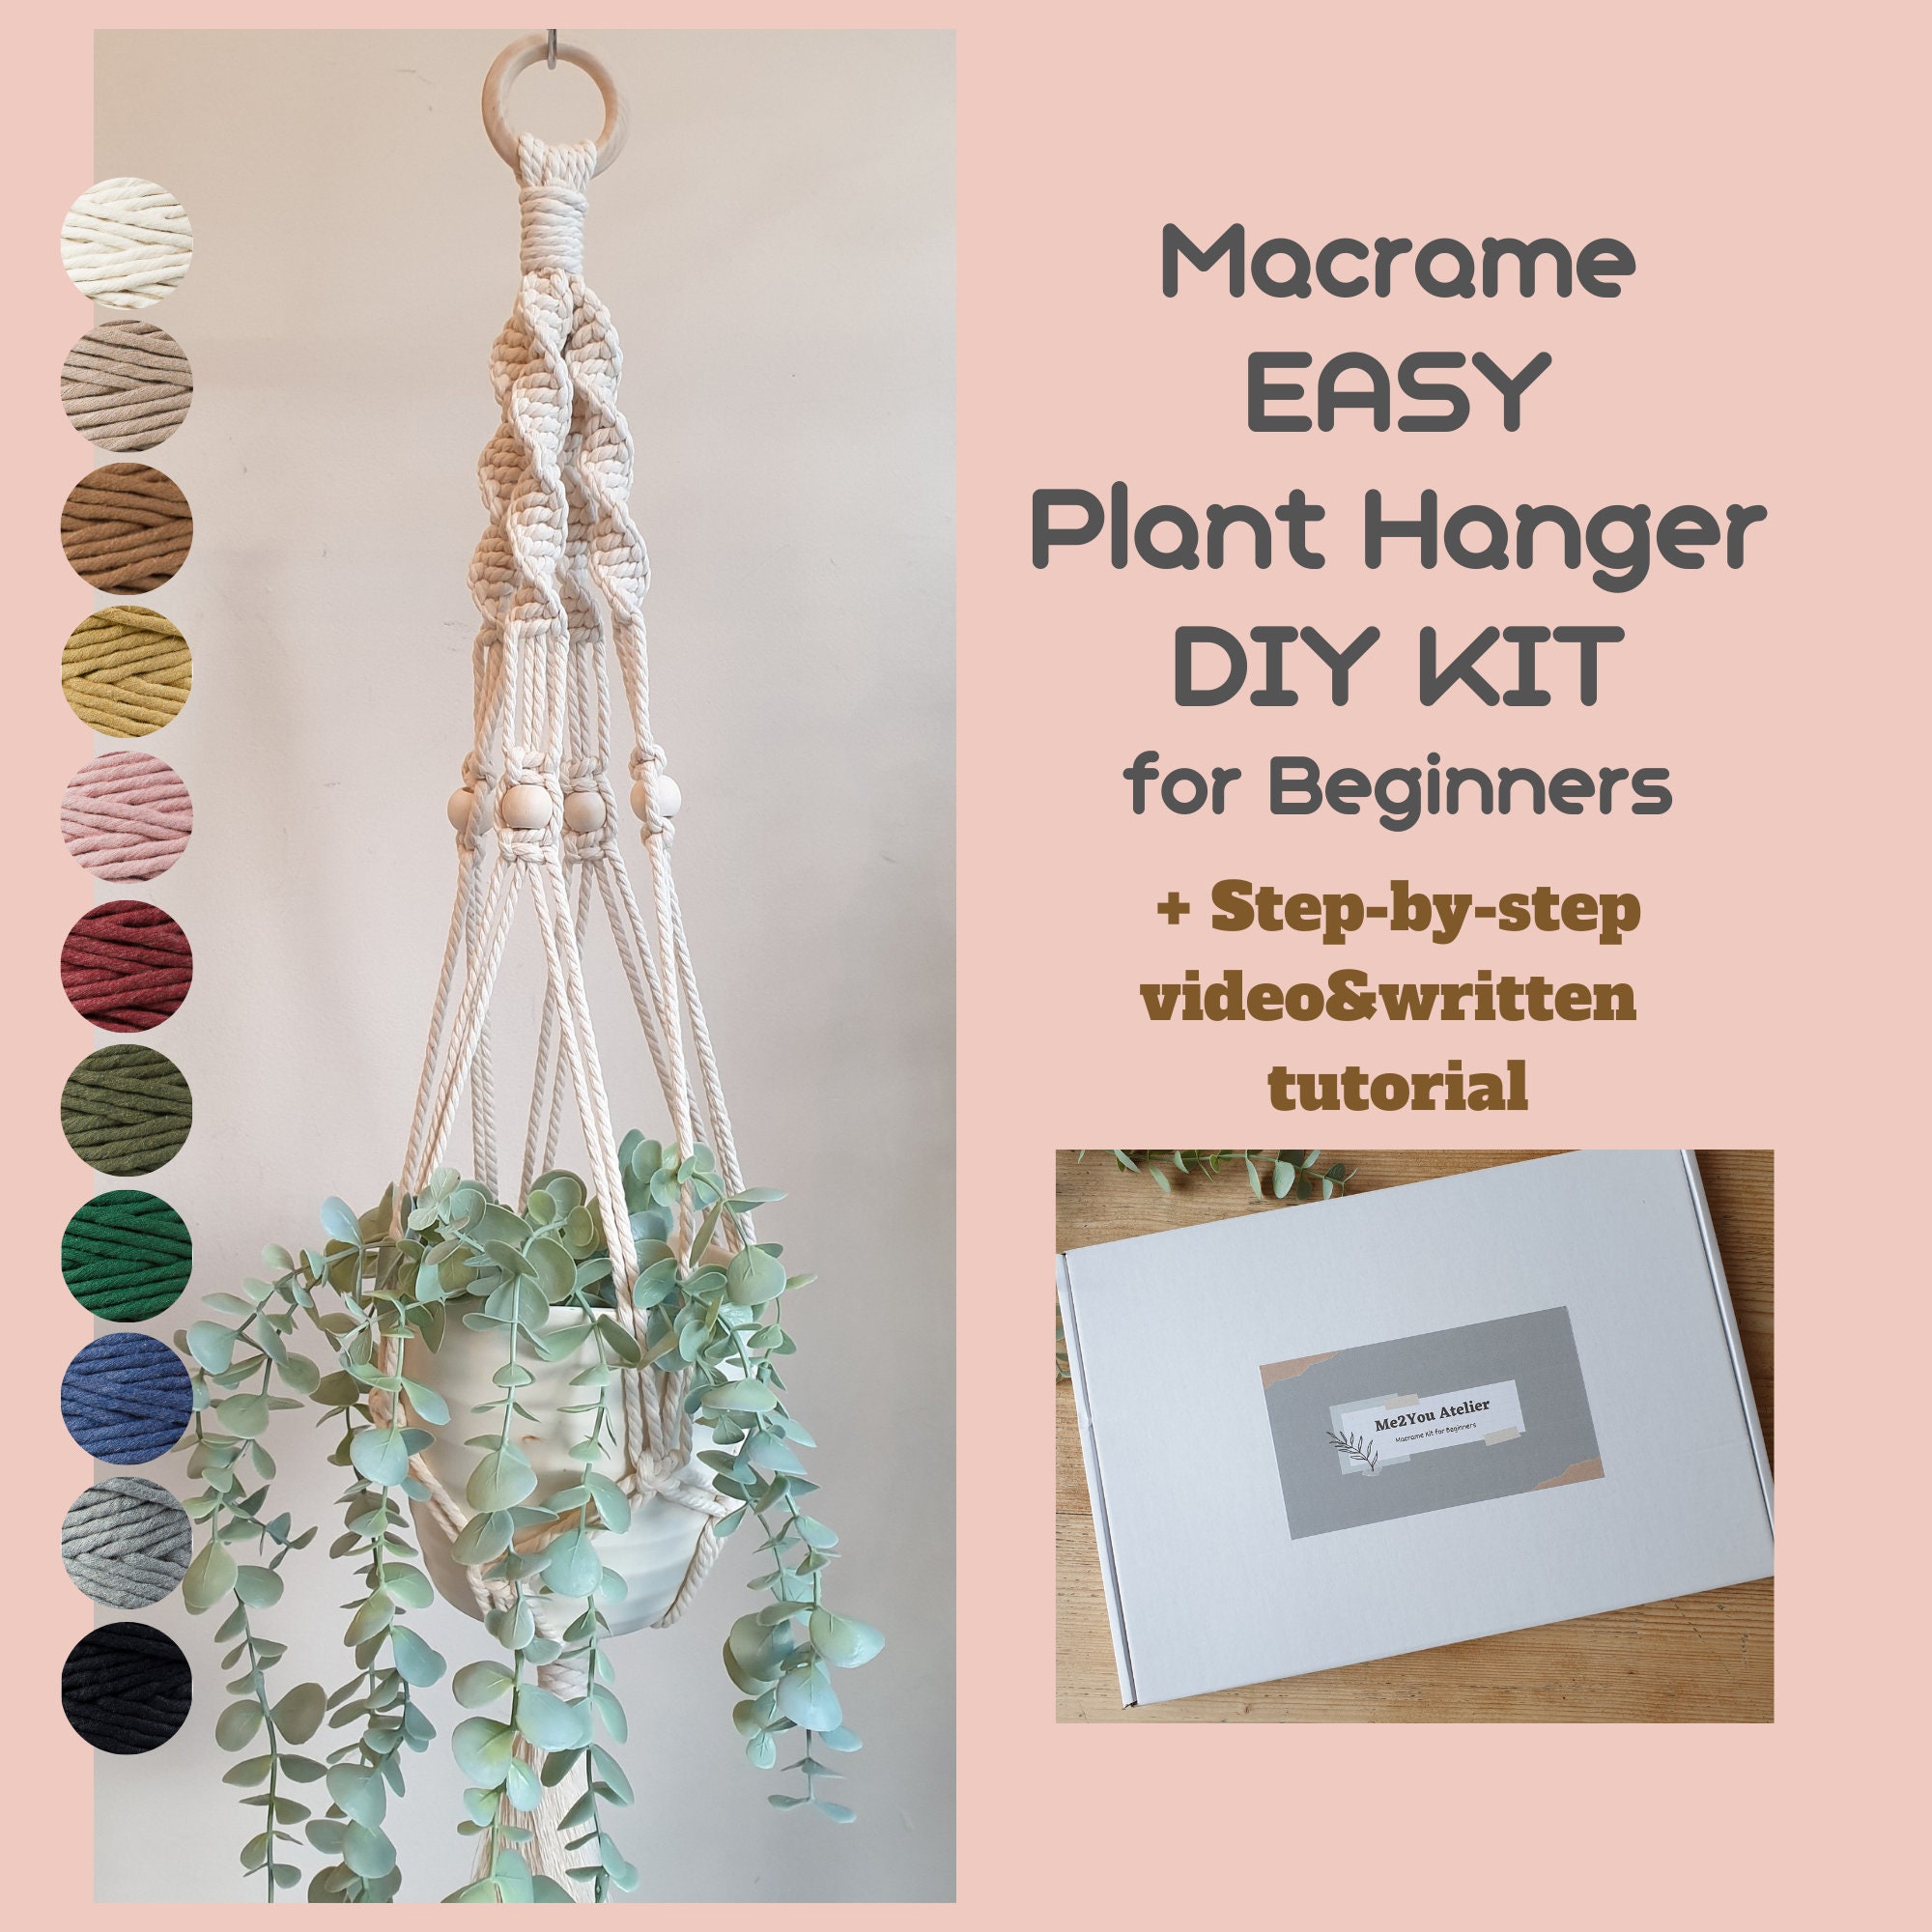 Dropship DIY Macrame Small Air Plant Hanger Kit to Sell Online at a Lower  Price